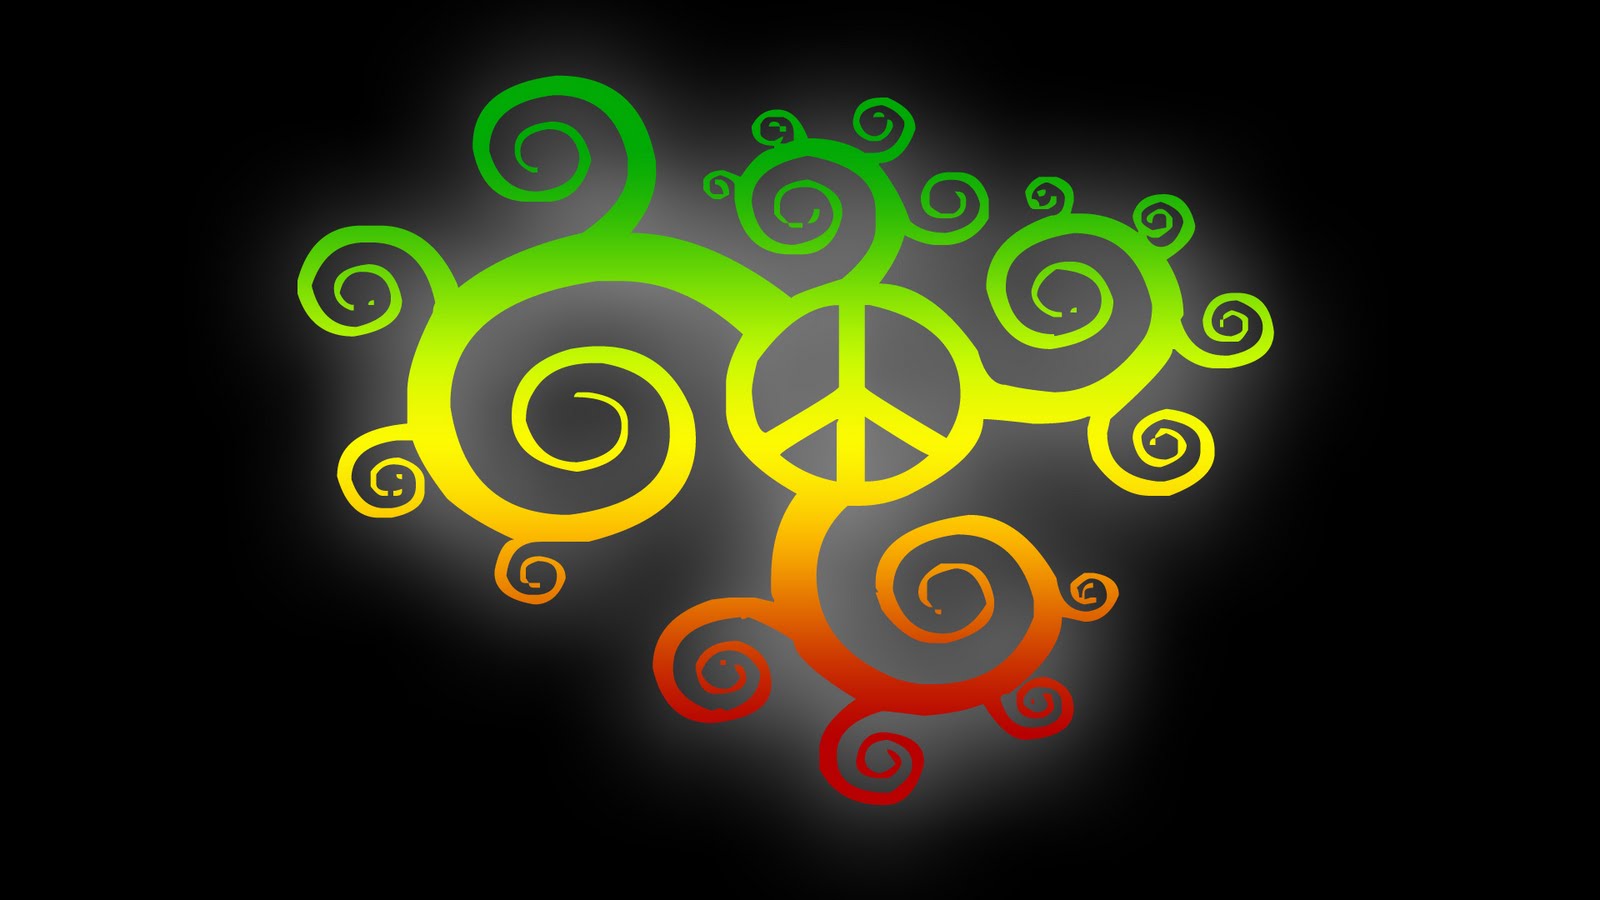 another 4 new rasta color wallpapers